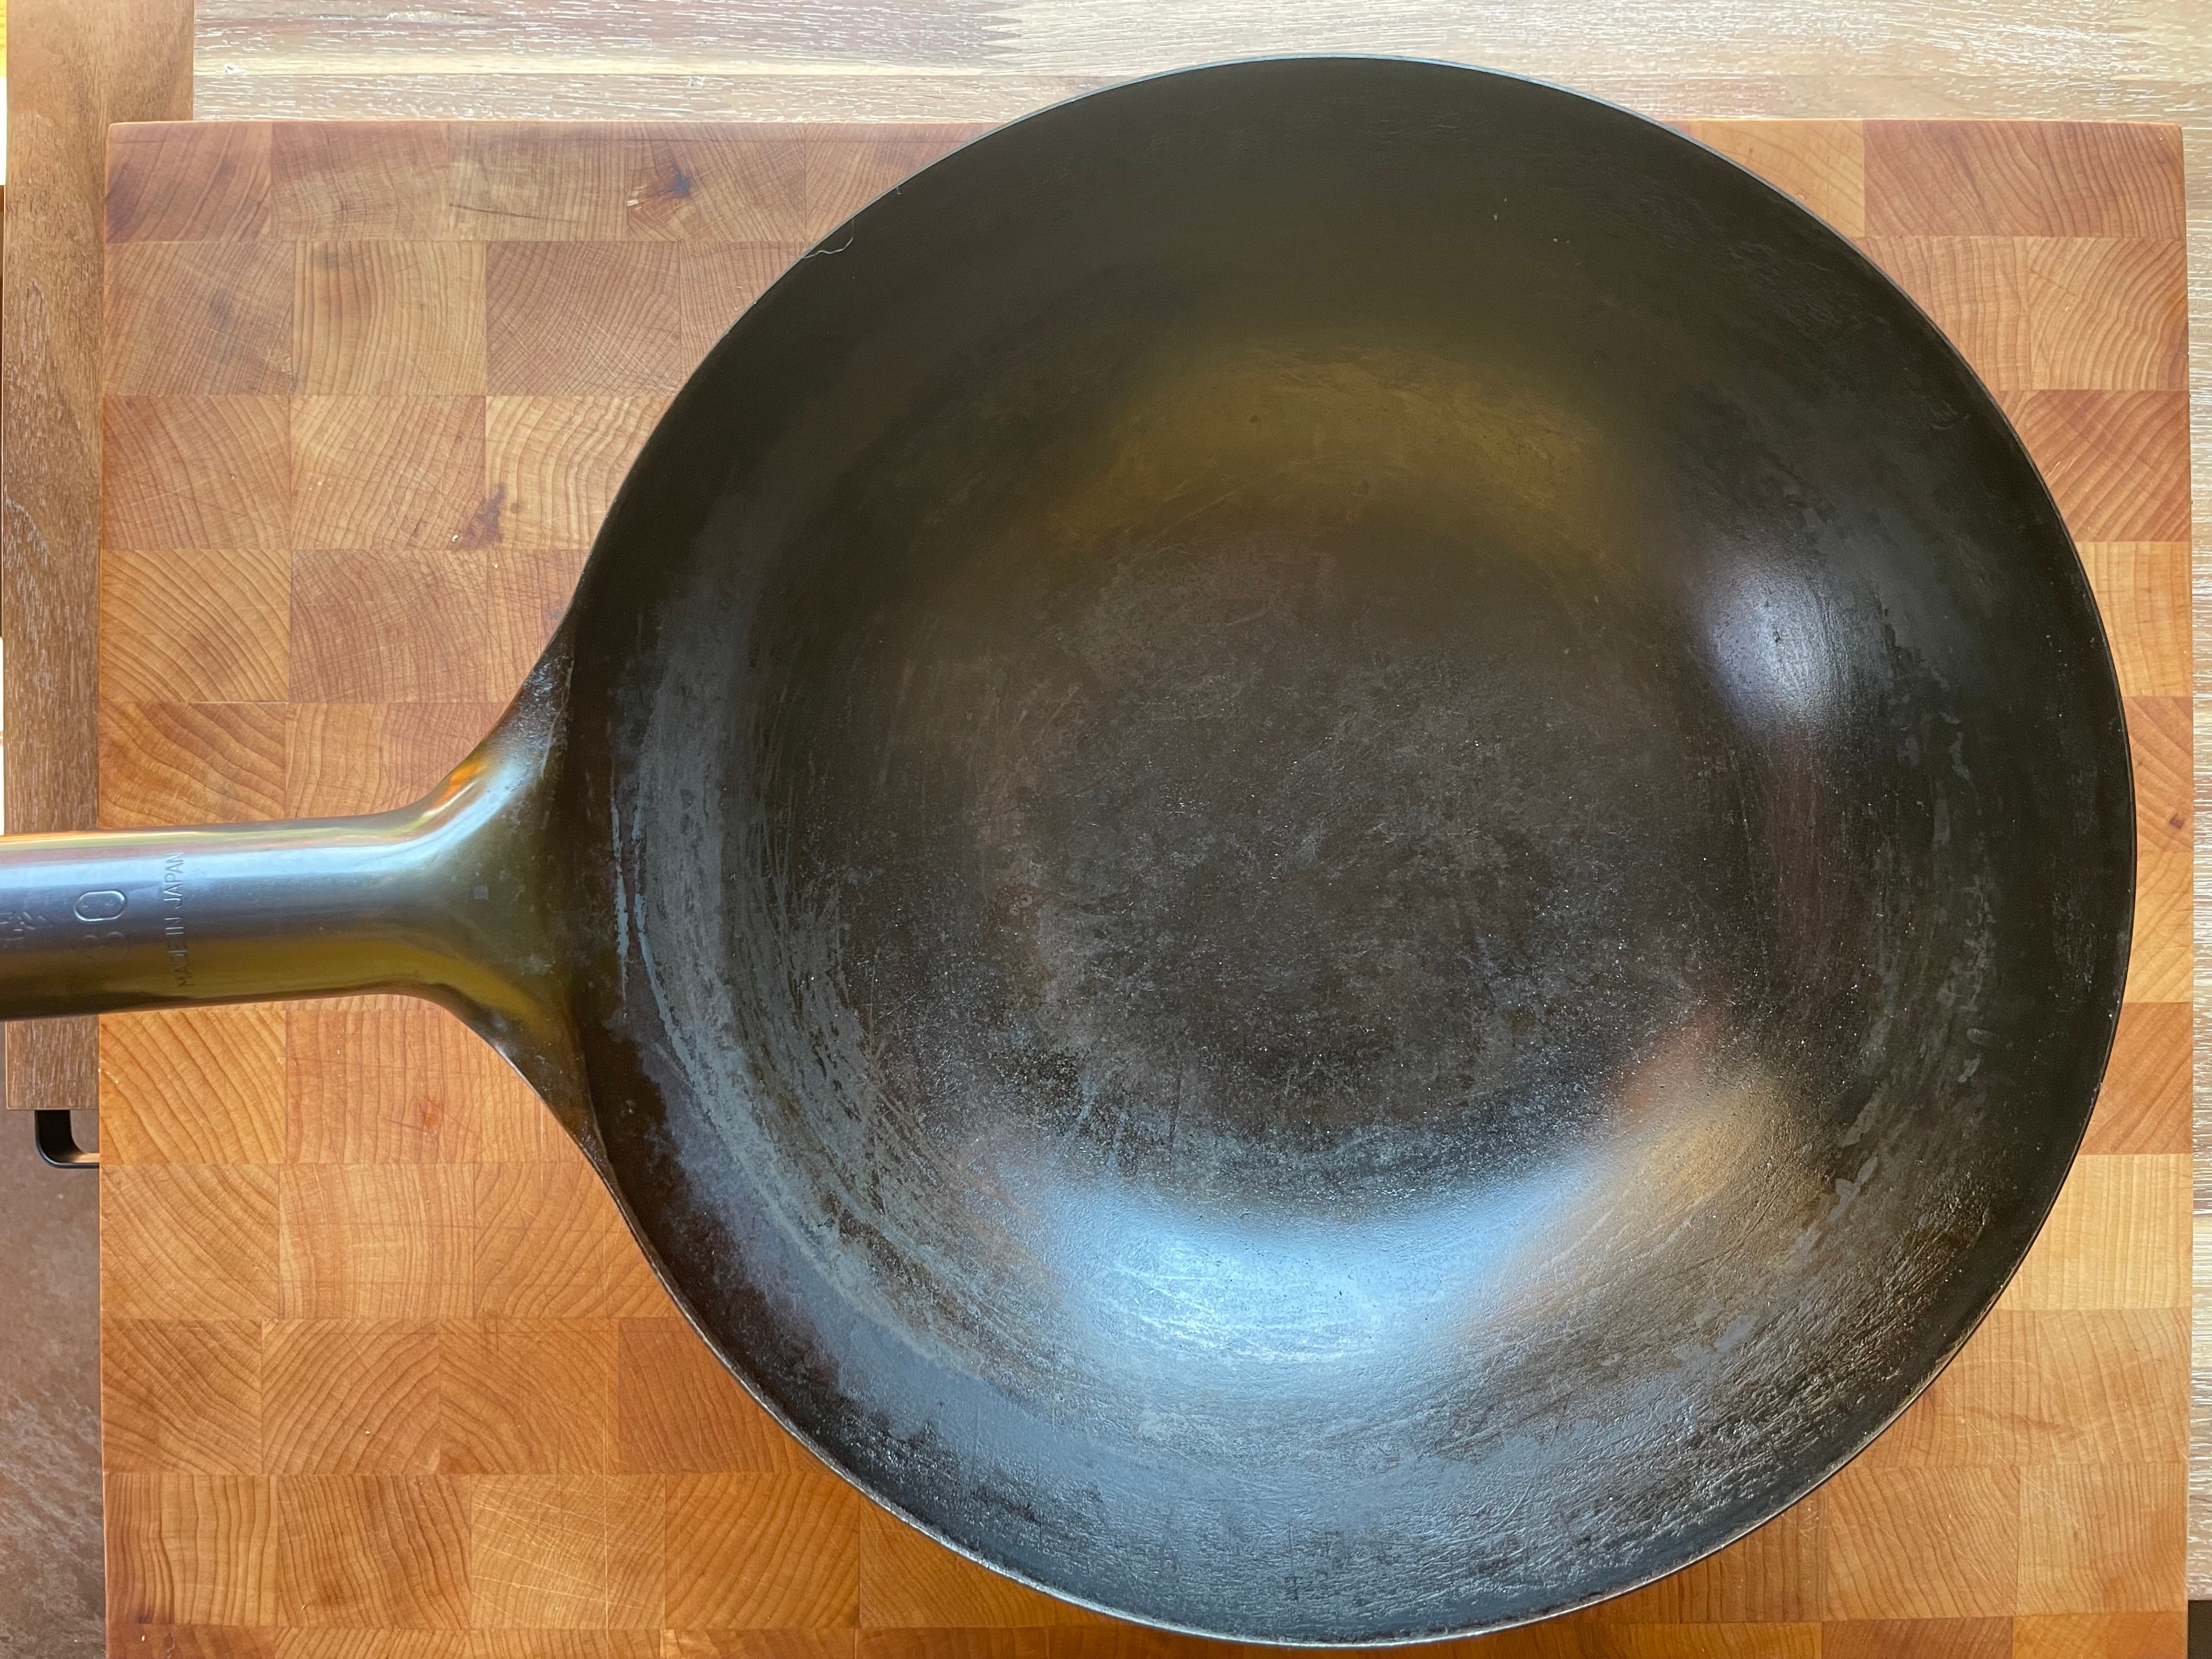 Wok vs. Frying Pan: Which to Use